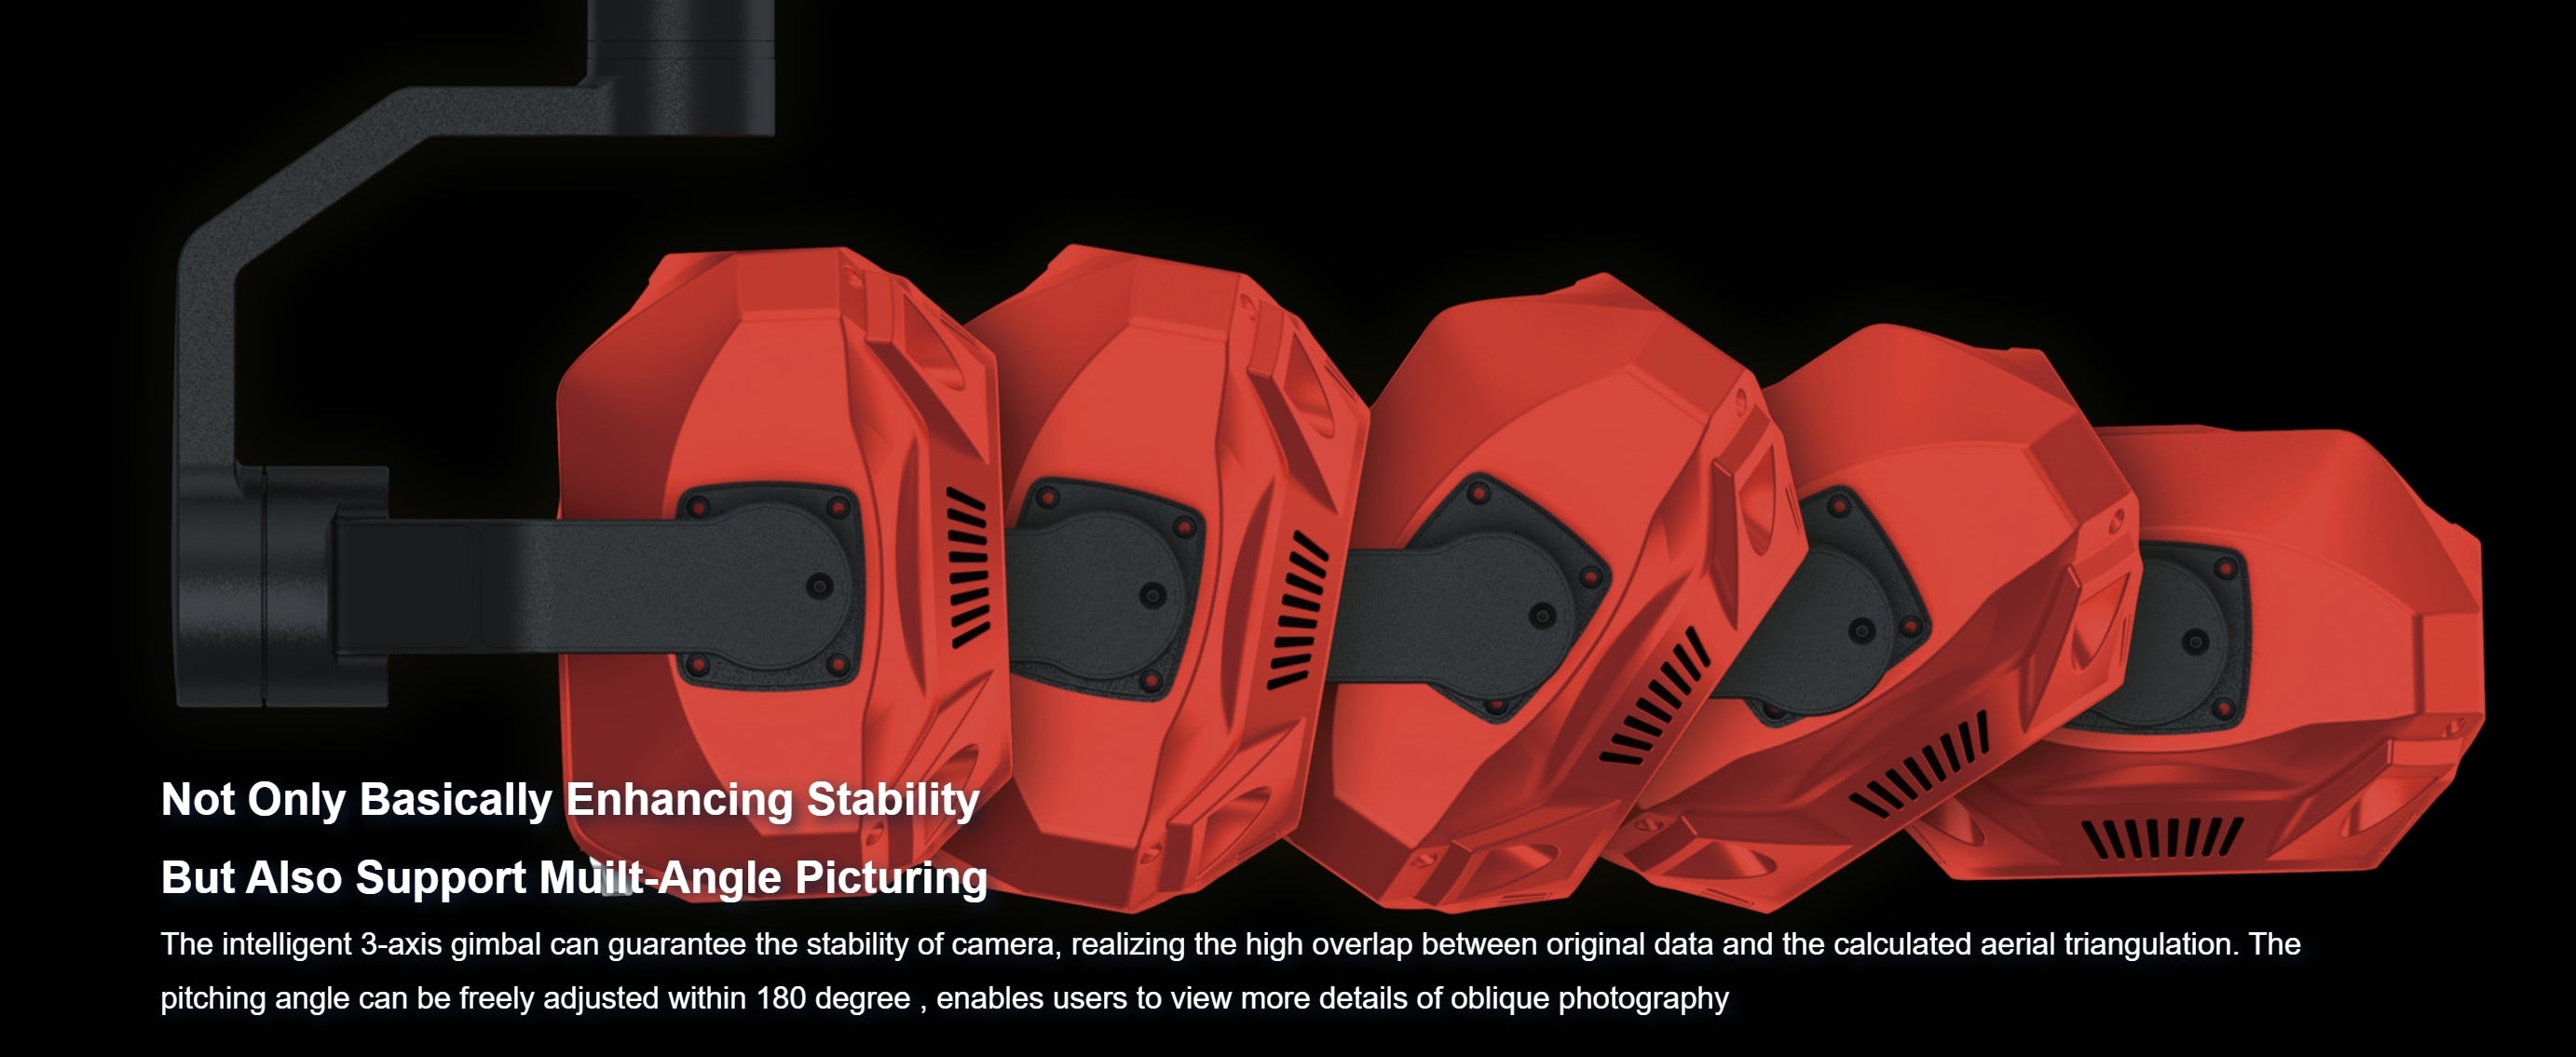 SHARE PSDK 102S V3, Intelligent gimbal for precise aerial triangulation with adjustable pitch angle up to 180 degrees.